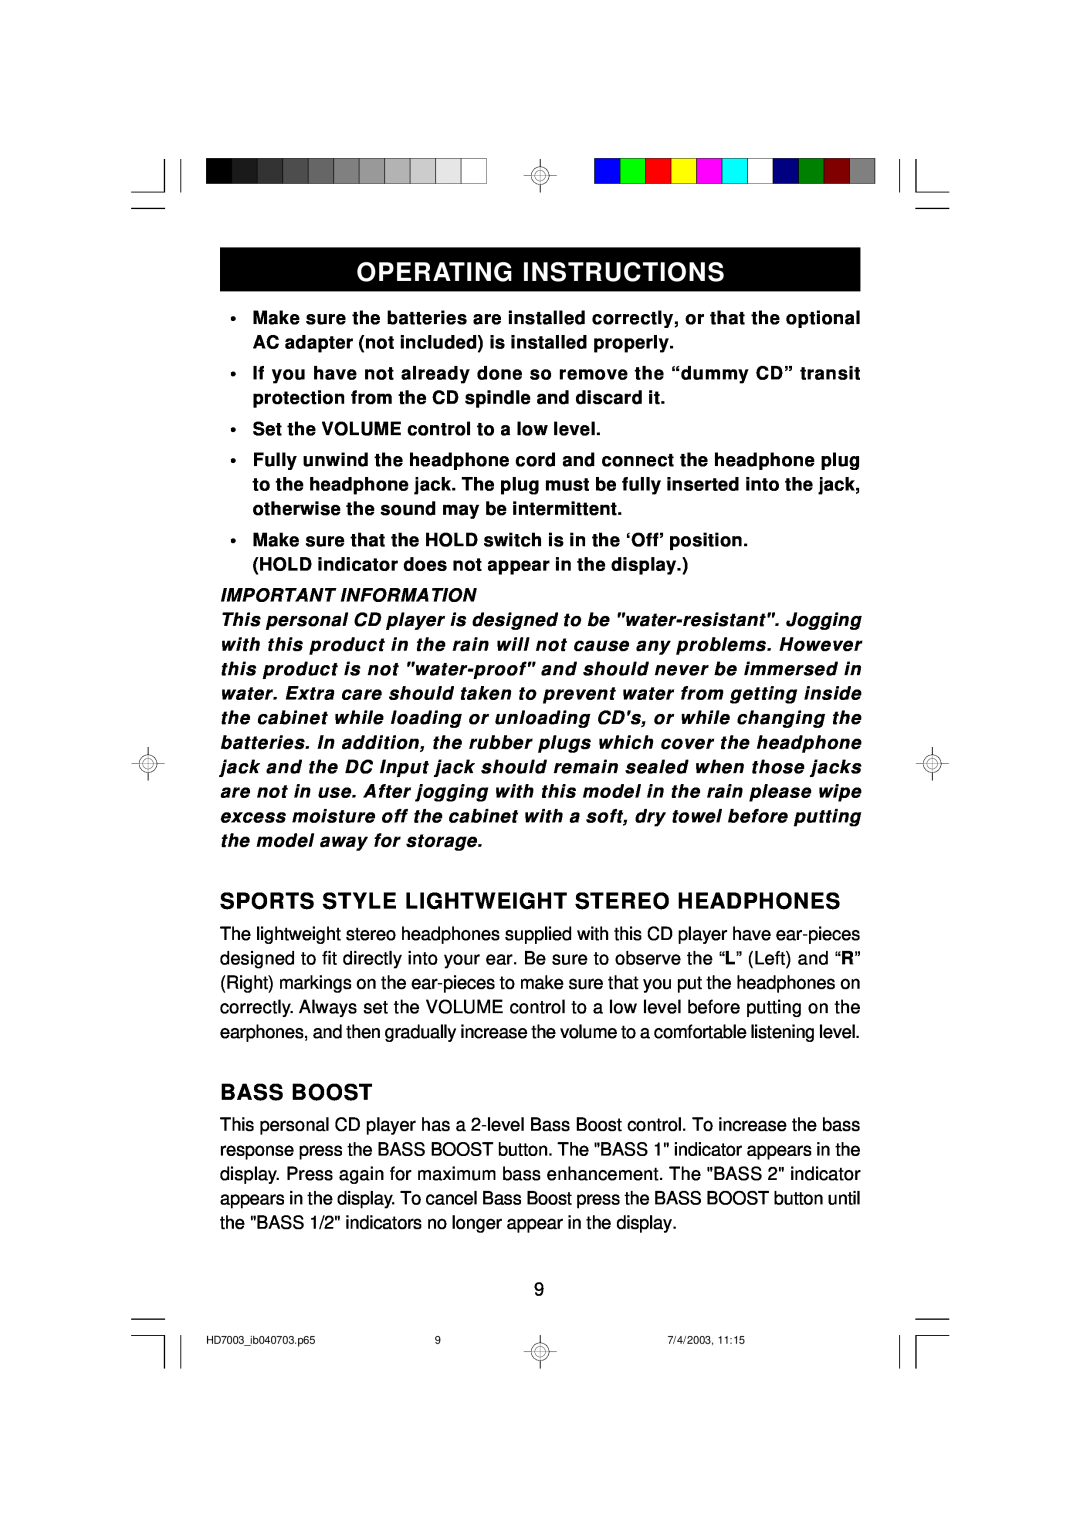 Emerson HD7003 owner manual Operating Instructions, Sports Style Lightweight Stereo Headphones, Bass Boost 